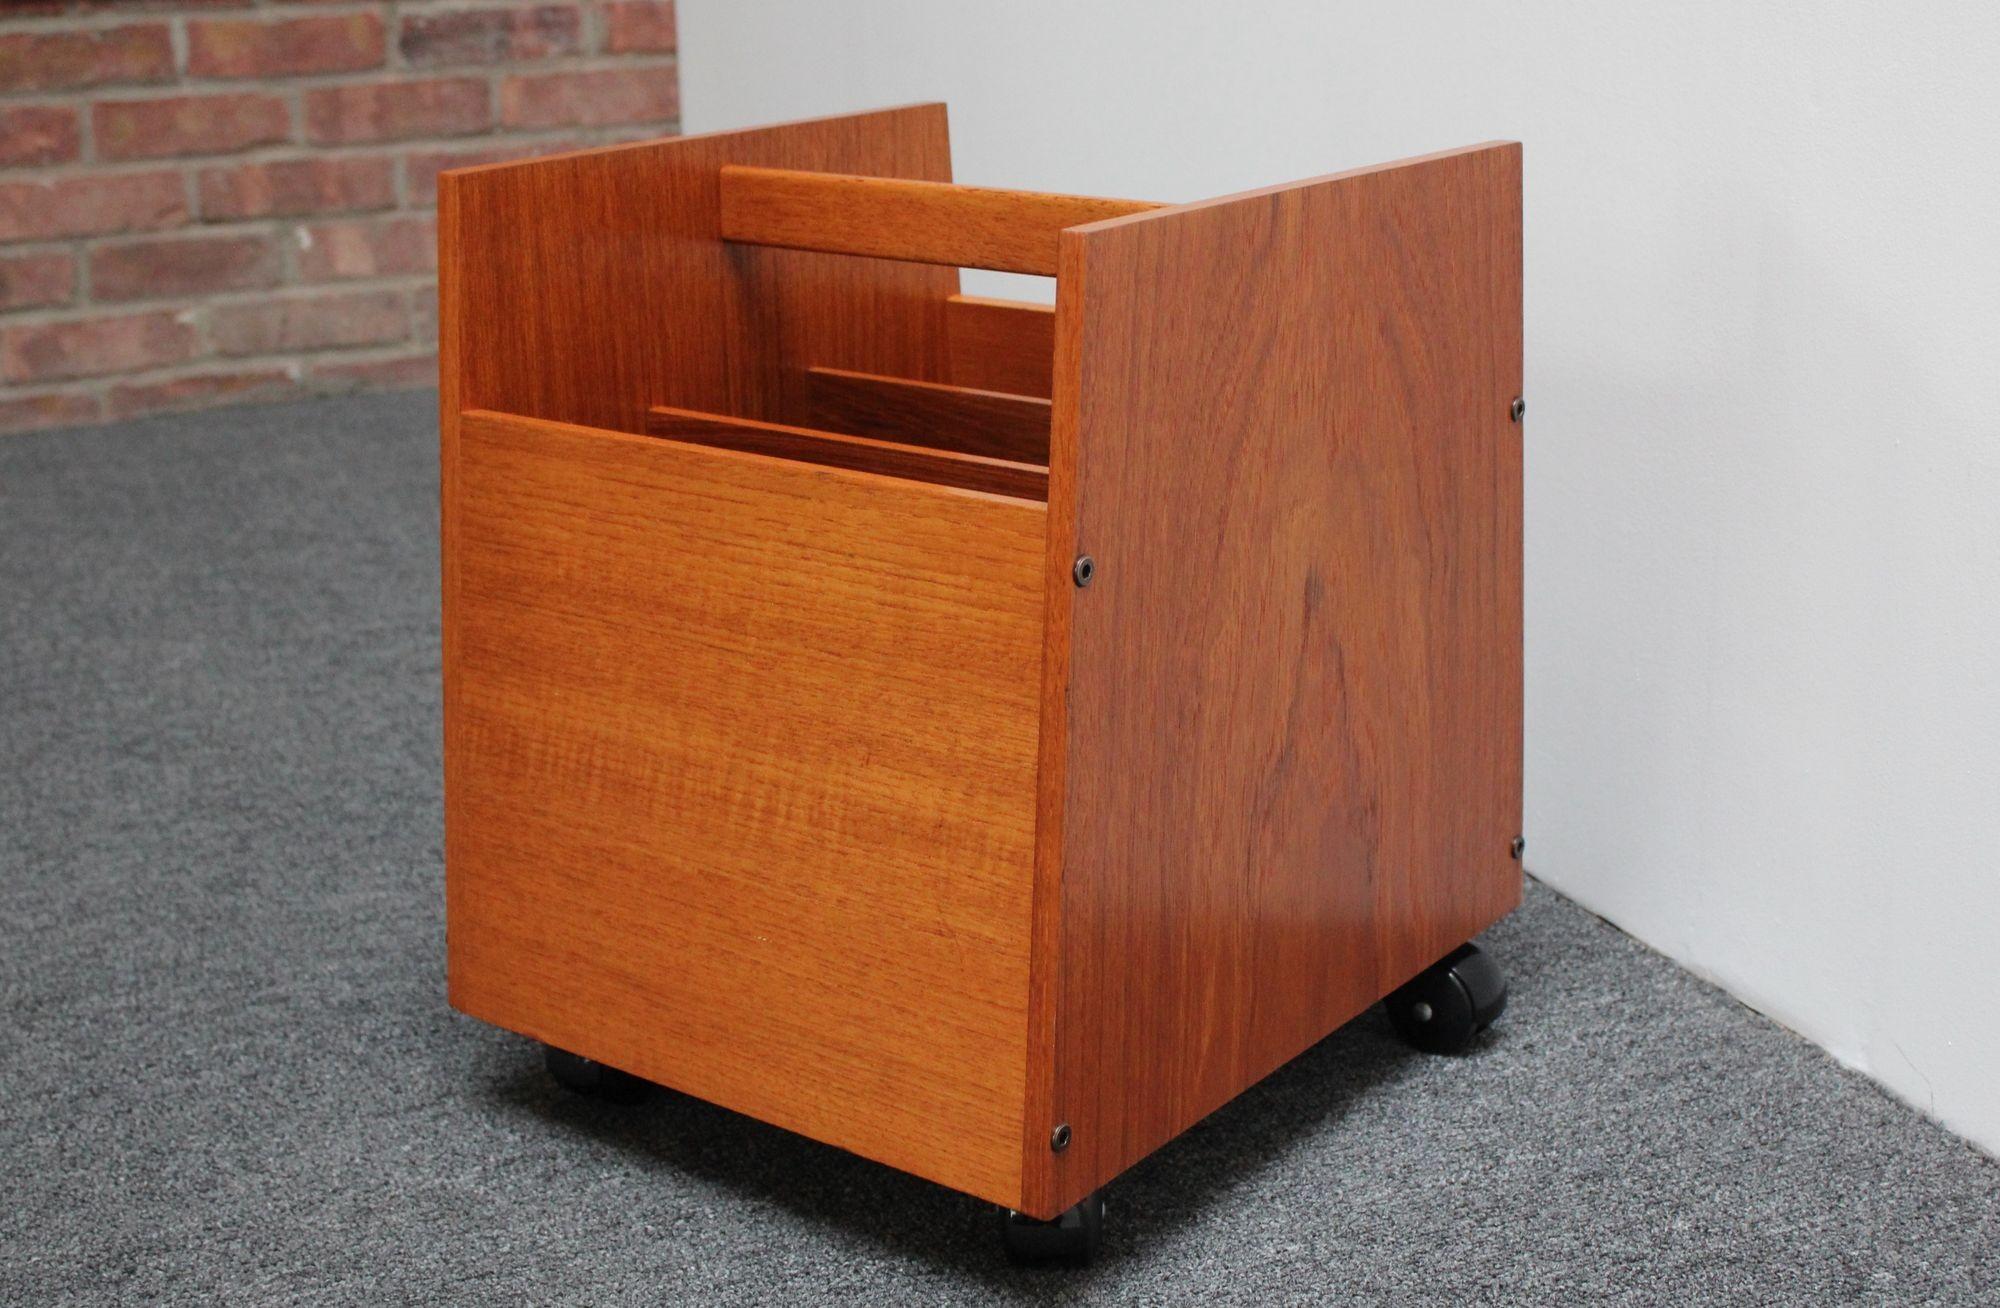 Mid-Century Norwegian Modern teak magazine rack designed in the 1960s by Rolf Hesland for Bruksbo.
Features three slots for books/magazines with a sculptural handle, all supported by four caster wheels for easy mobility.
Retains the 